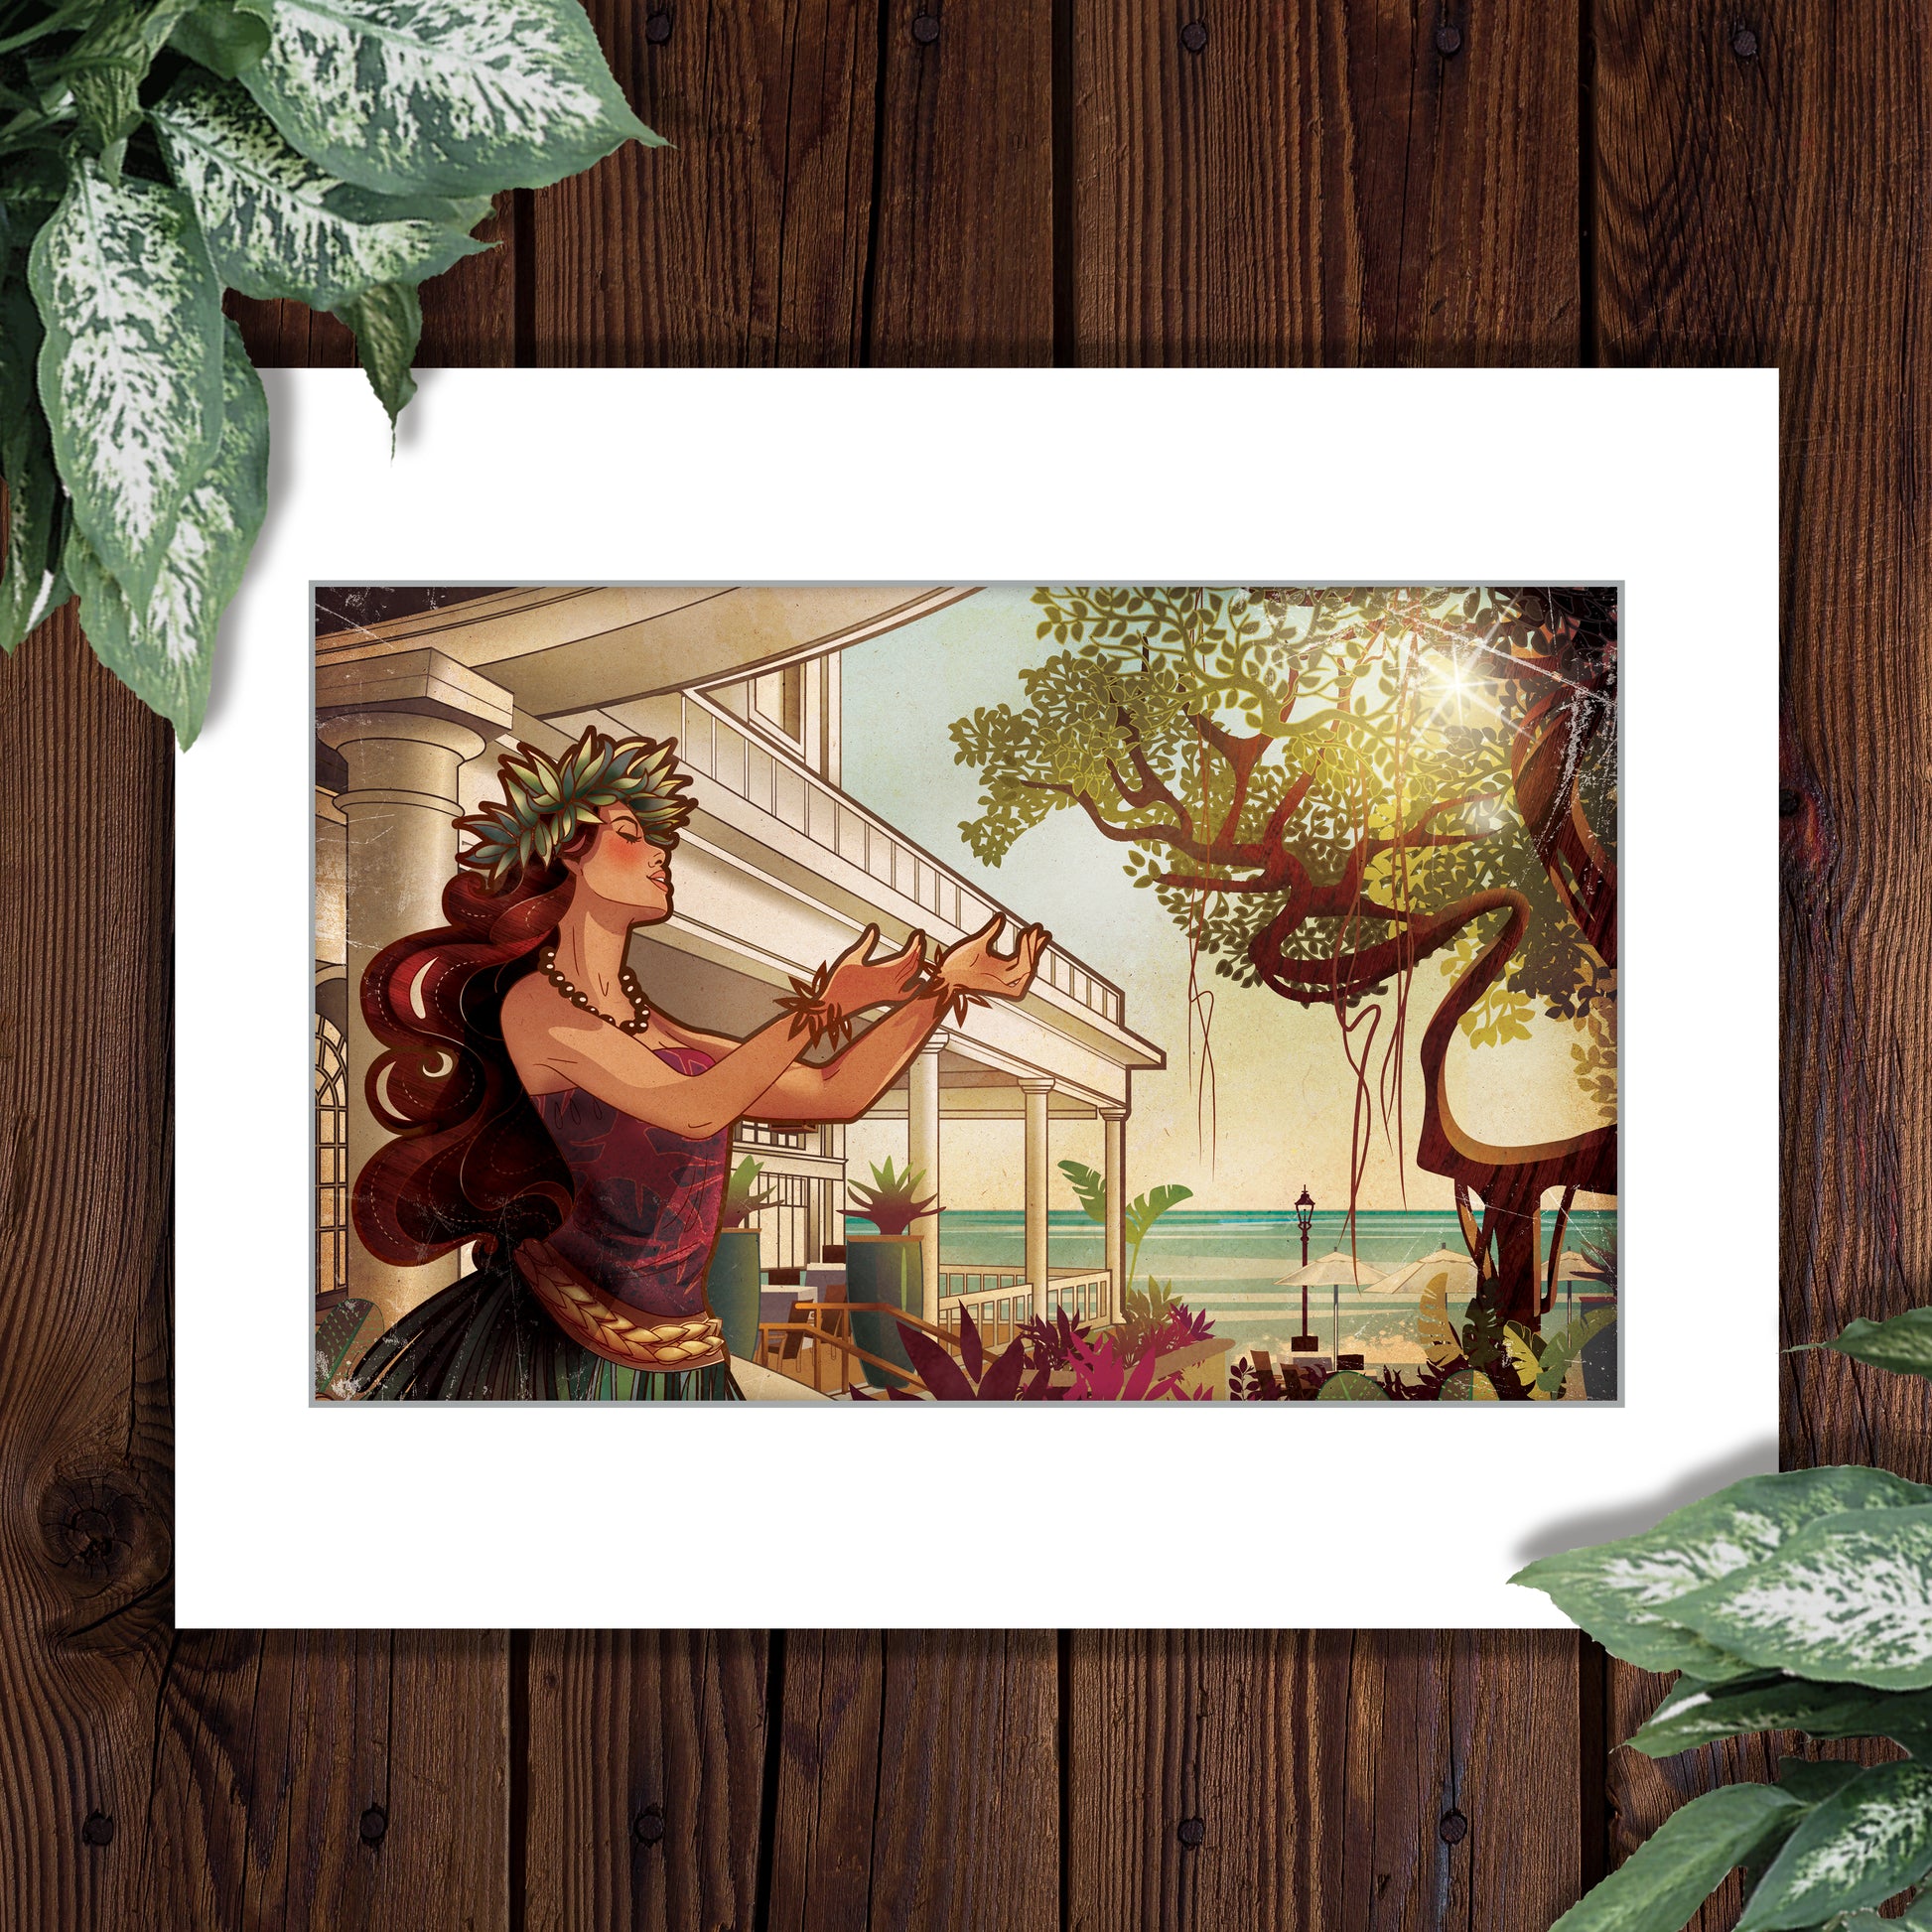 matted print of the Moana Surfrider Hotel featuring an illustration of a hawaiian woman dancing hula next to the banyan tree in the lanai of the hotel. The image is in the style of art nouveau